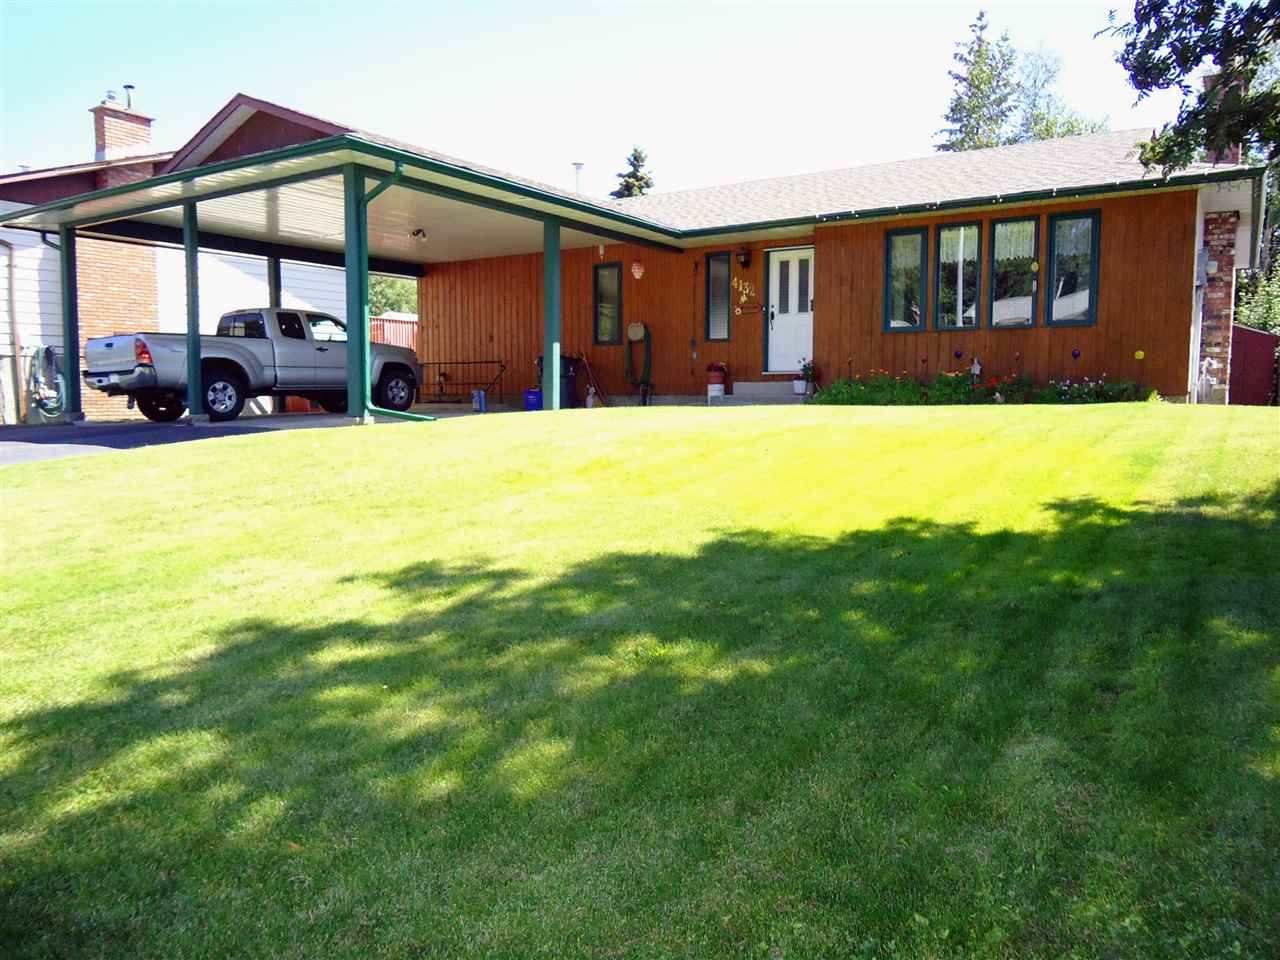 Main Photo: 4132 BAKER Road in Prince George: Charella/Starlane House for sale (PG City South (Zone 74))  : MLS®# R2369031